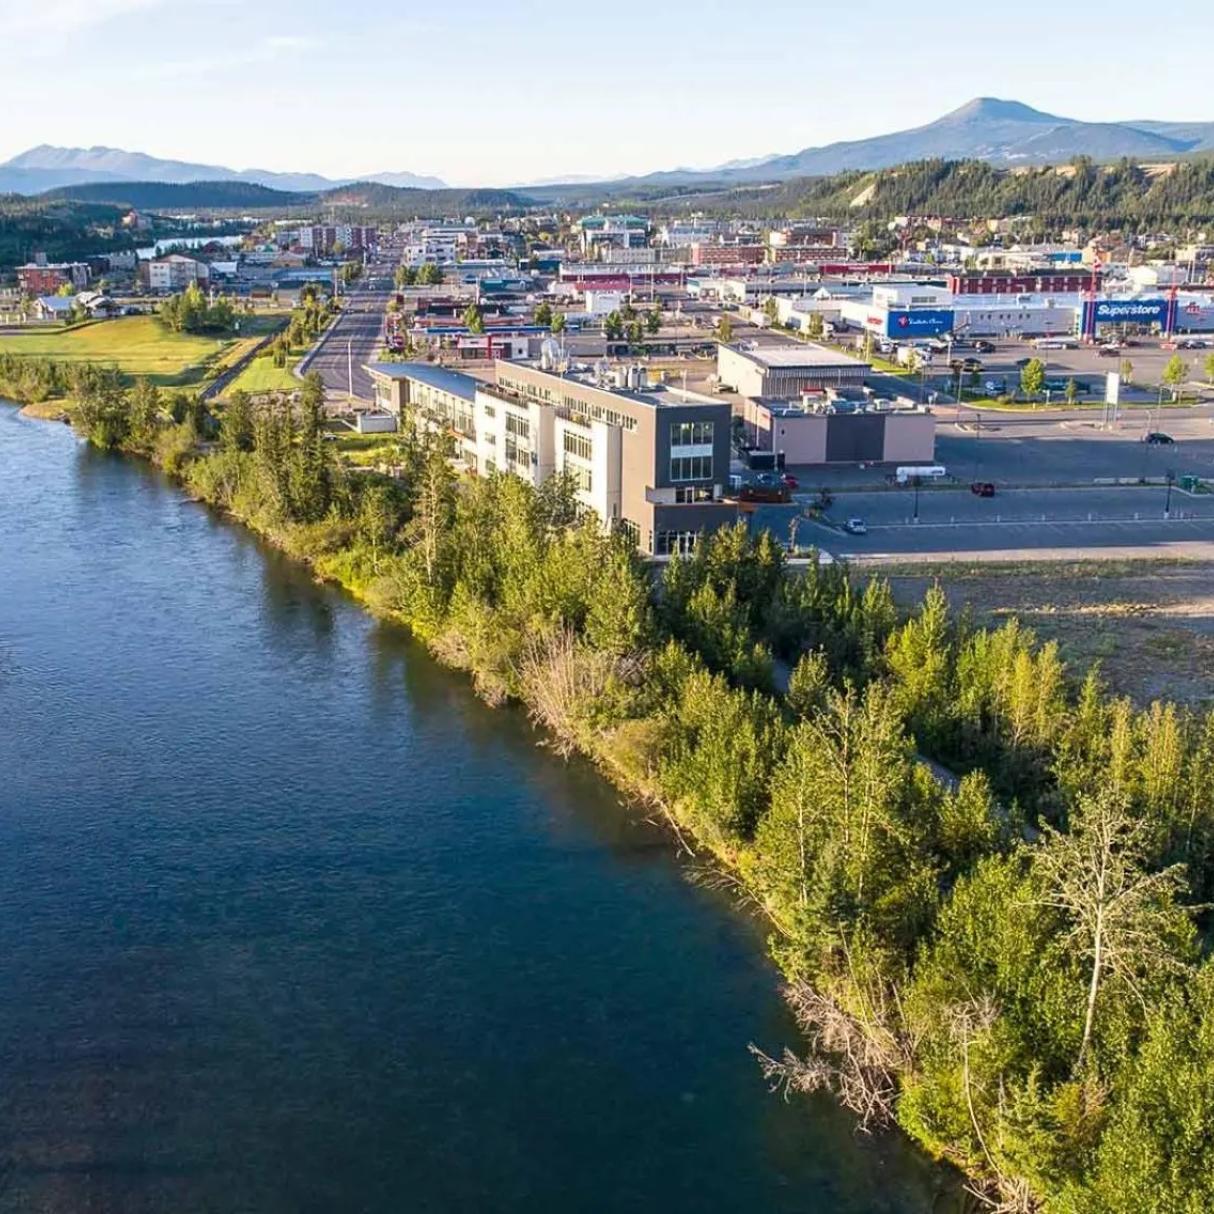 An aerial view of Whitehorse with the Yukon river running beside it